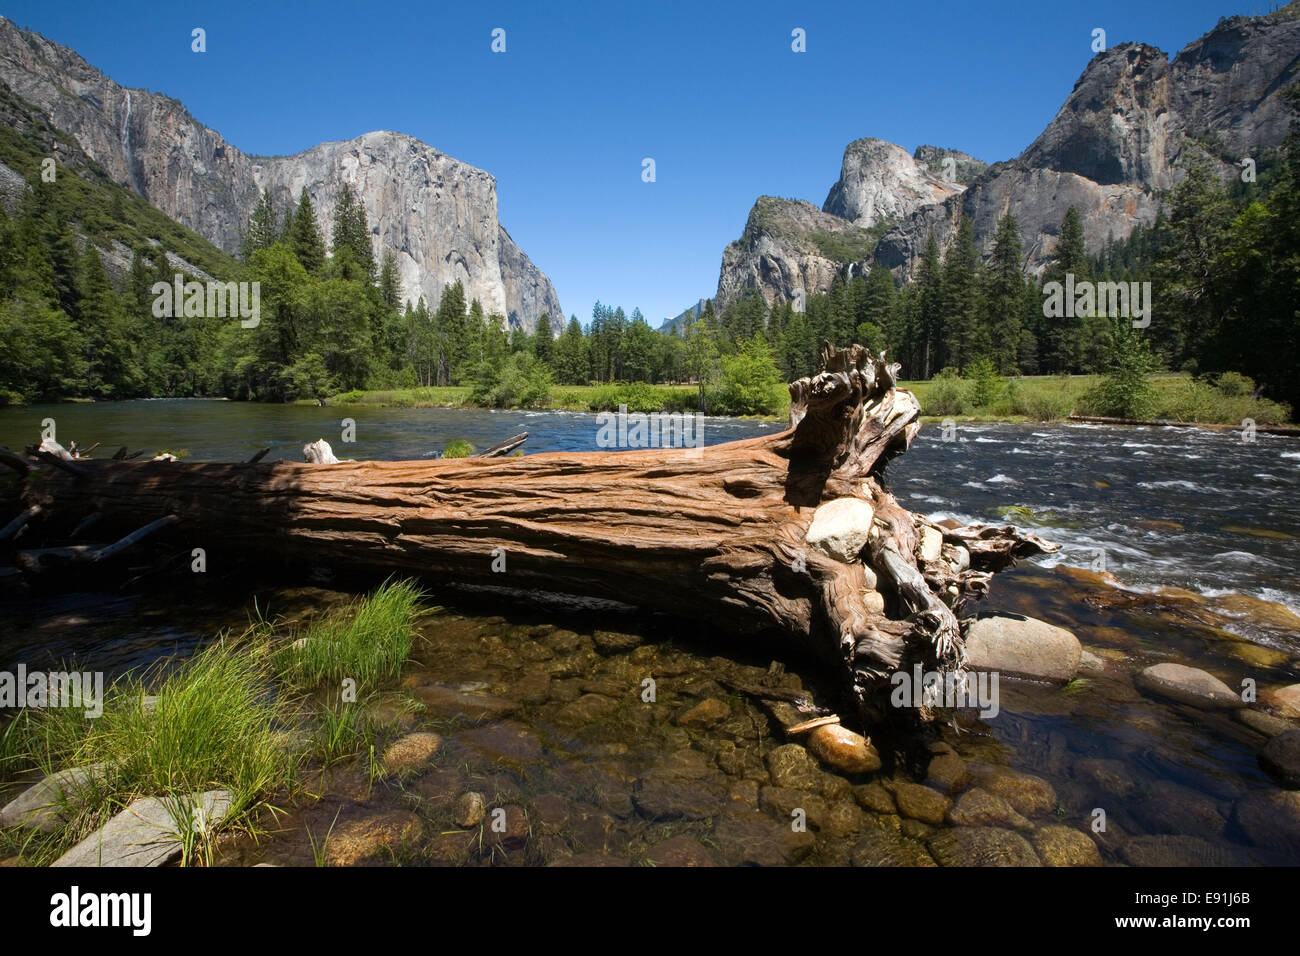 Valley view in the Yosemite national park Stock Photo